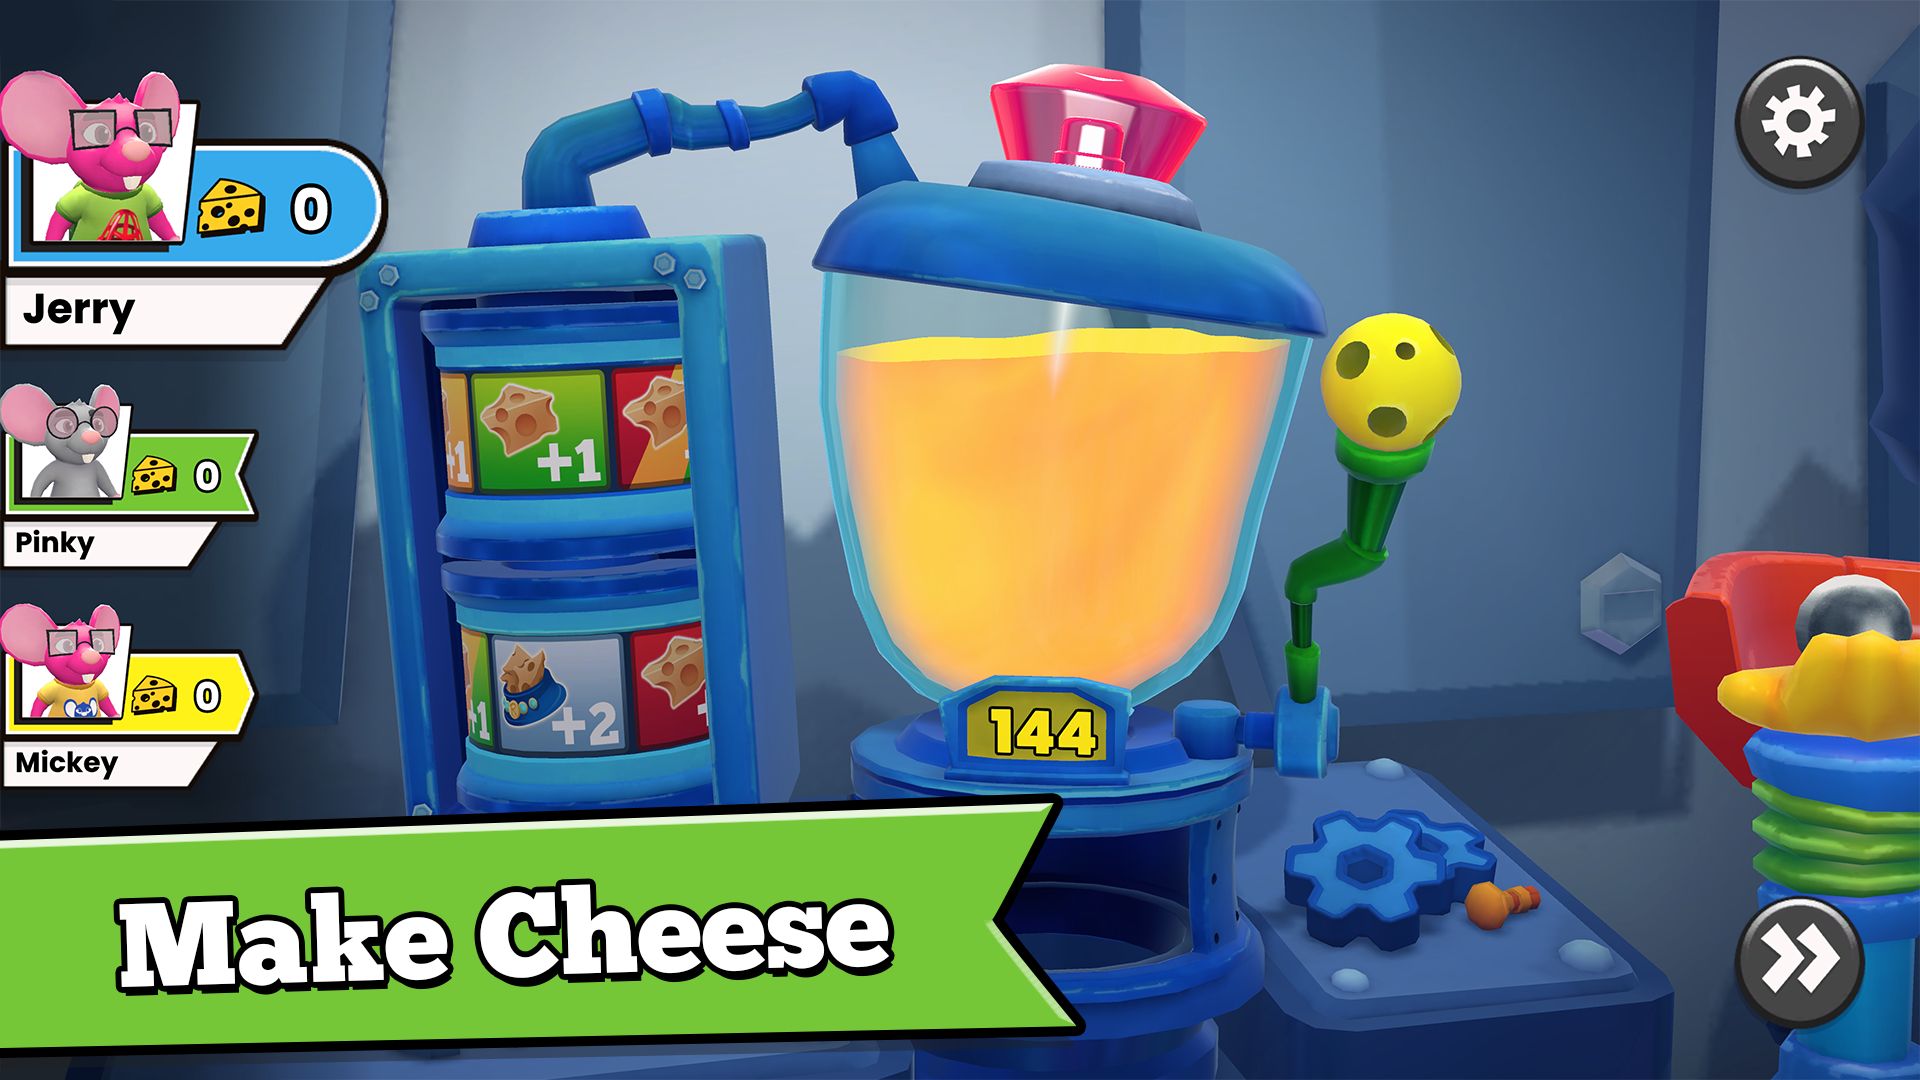 Mouse Trap - The Board Game - Android game screenshots.